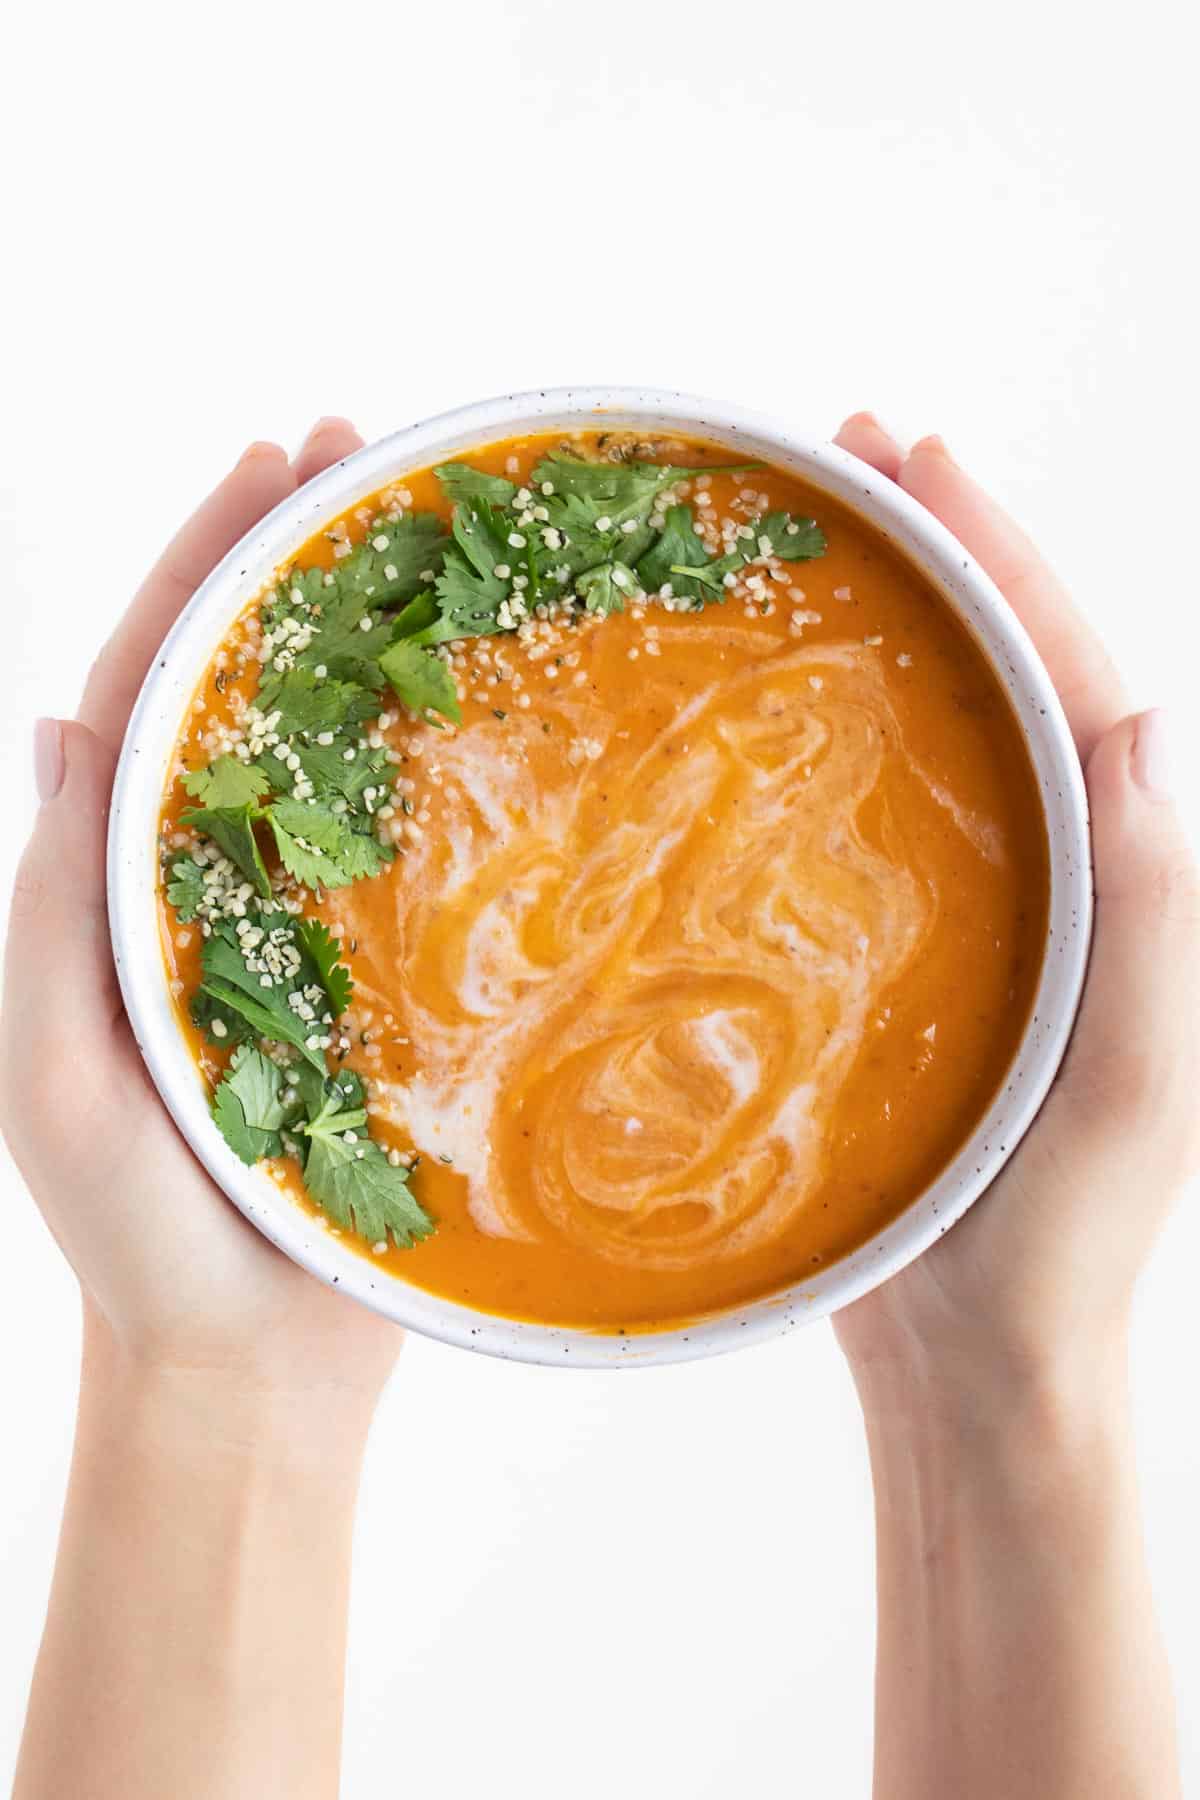 two hands holding a bowl of orange soup with cilantro and hemp seeds on top